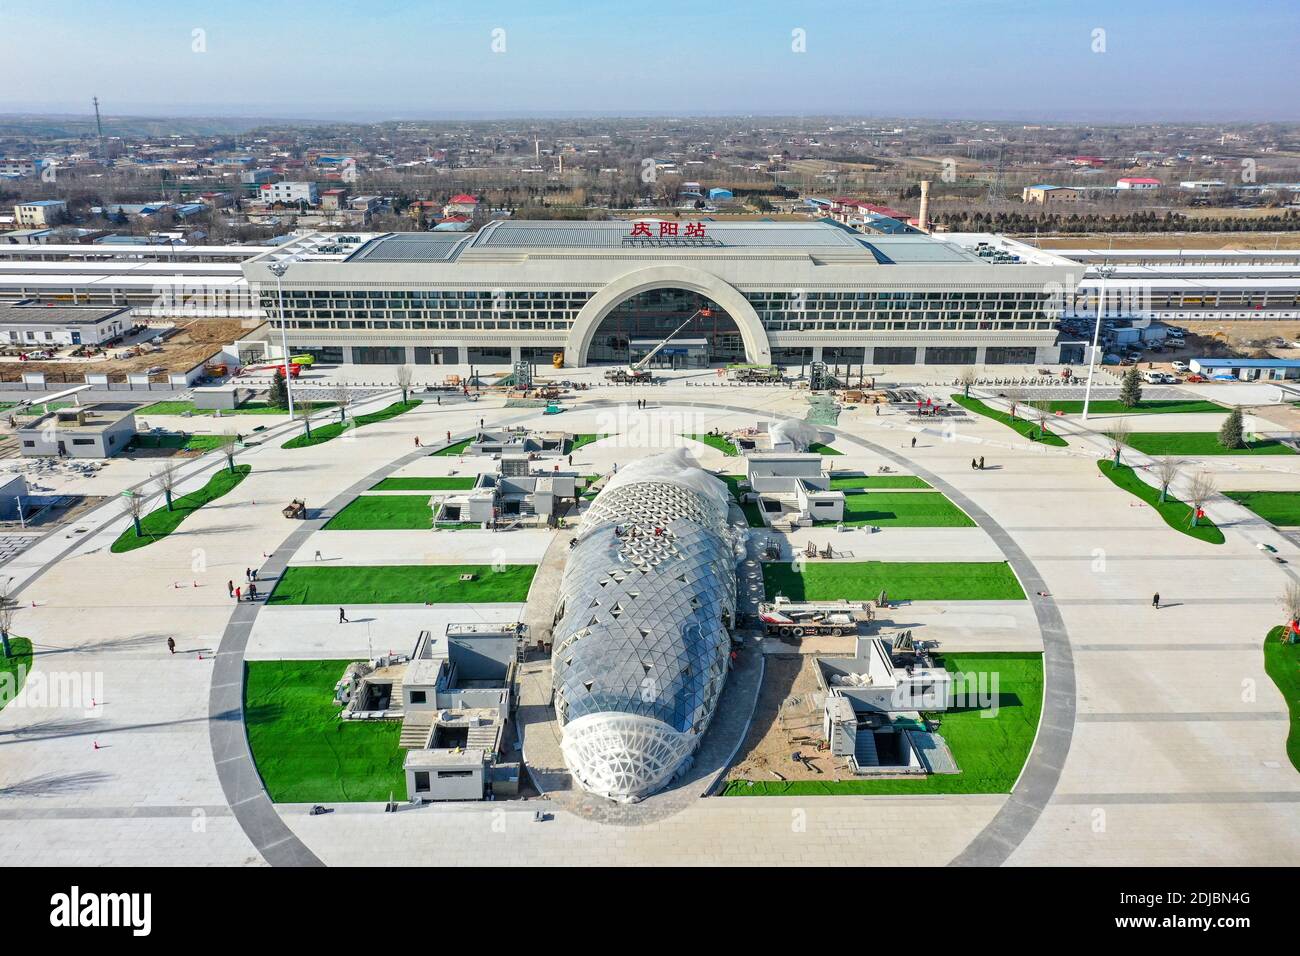 Yinchuan. 14th Dec, 2020. Aerial photo taken on Dec. 14, 2020 shows a view of the Qingyang Railway Station along the Yinchuan-Xi'an high-speed railway in Qingyang City, northwest China's Gansu Province. The Yinchuan-Xi'an high-speed railway and the stations along the line will be put into service soon. Credit: Feng Kaihua/Xinhua/Alamy Live News Stock Photo